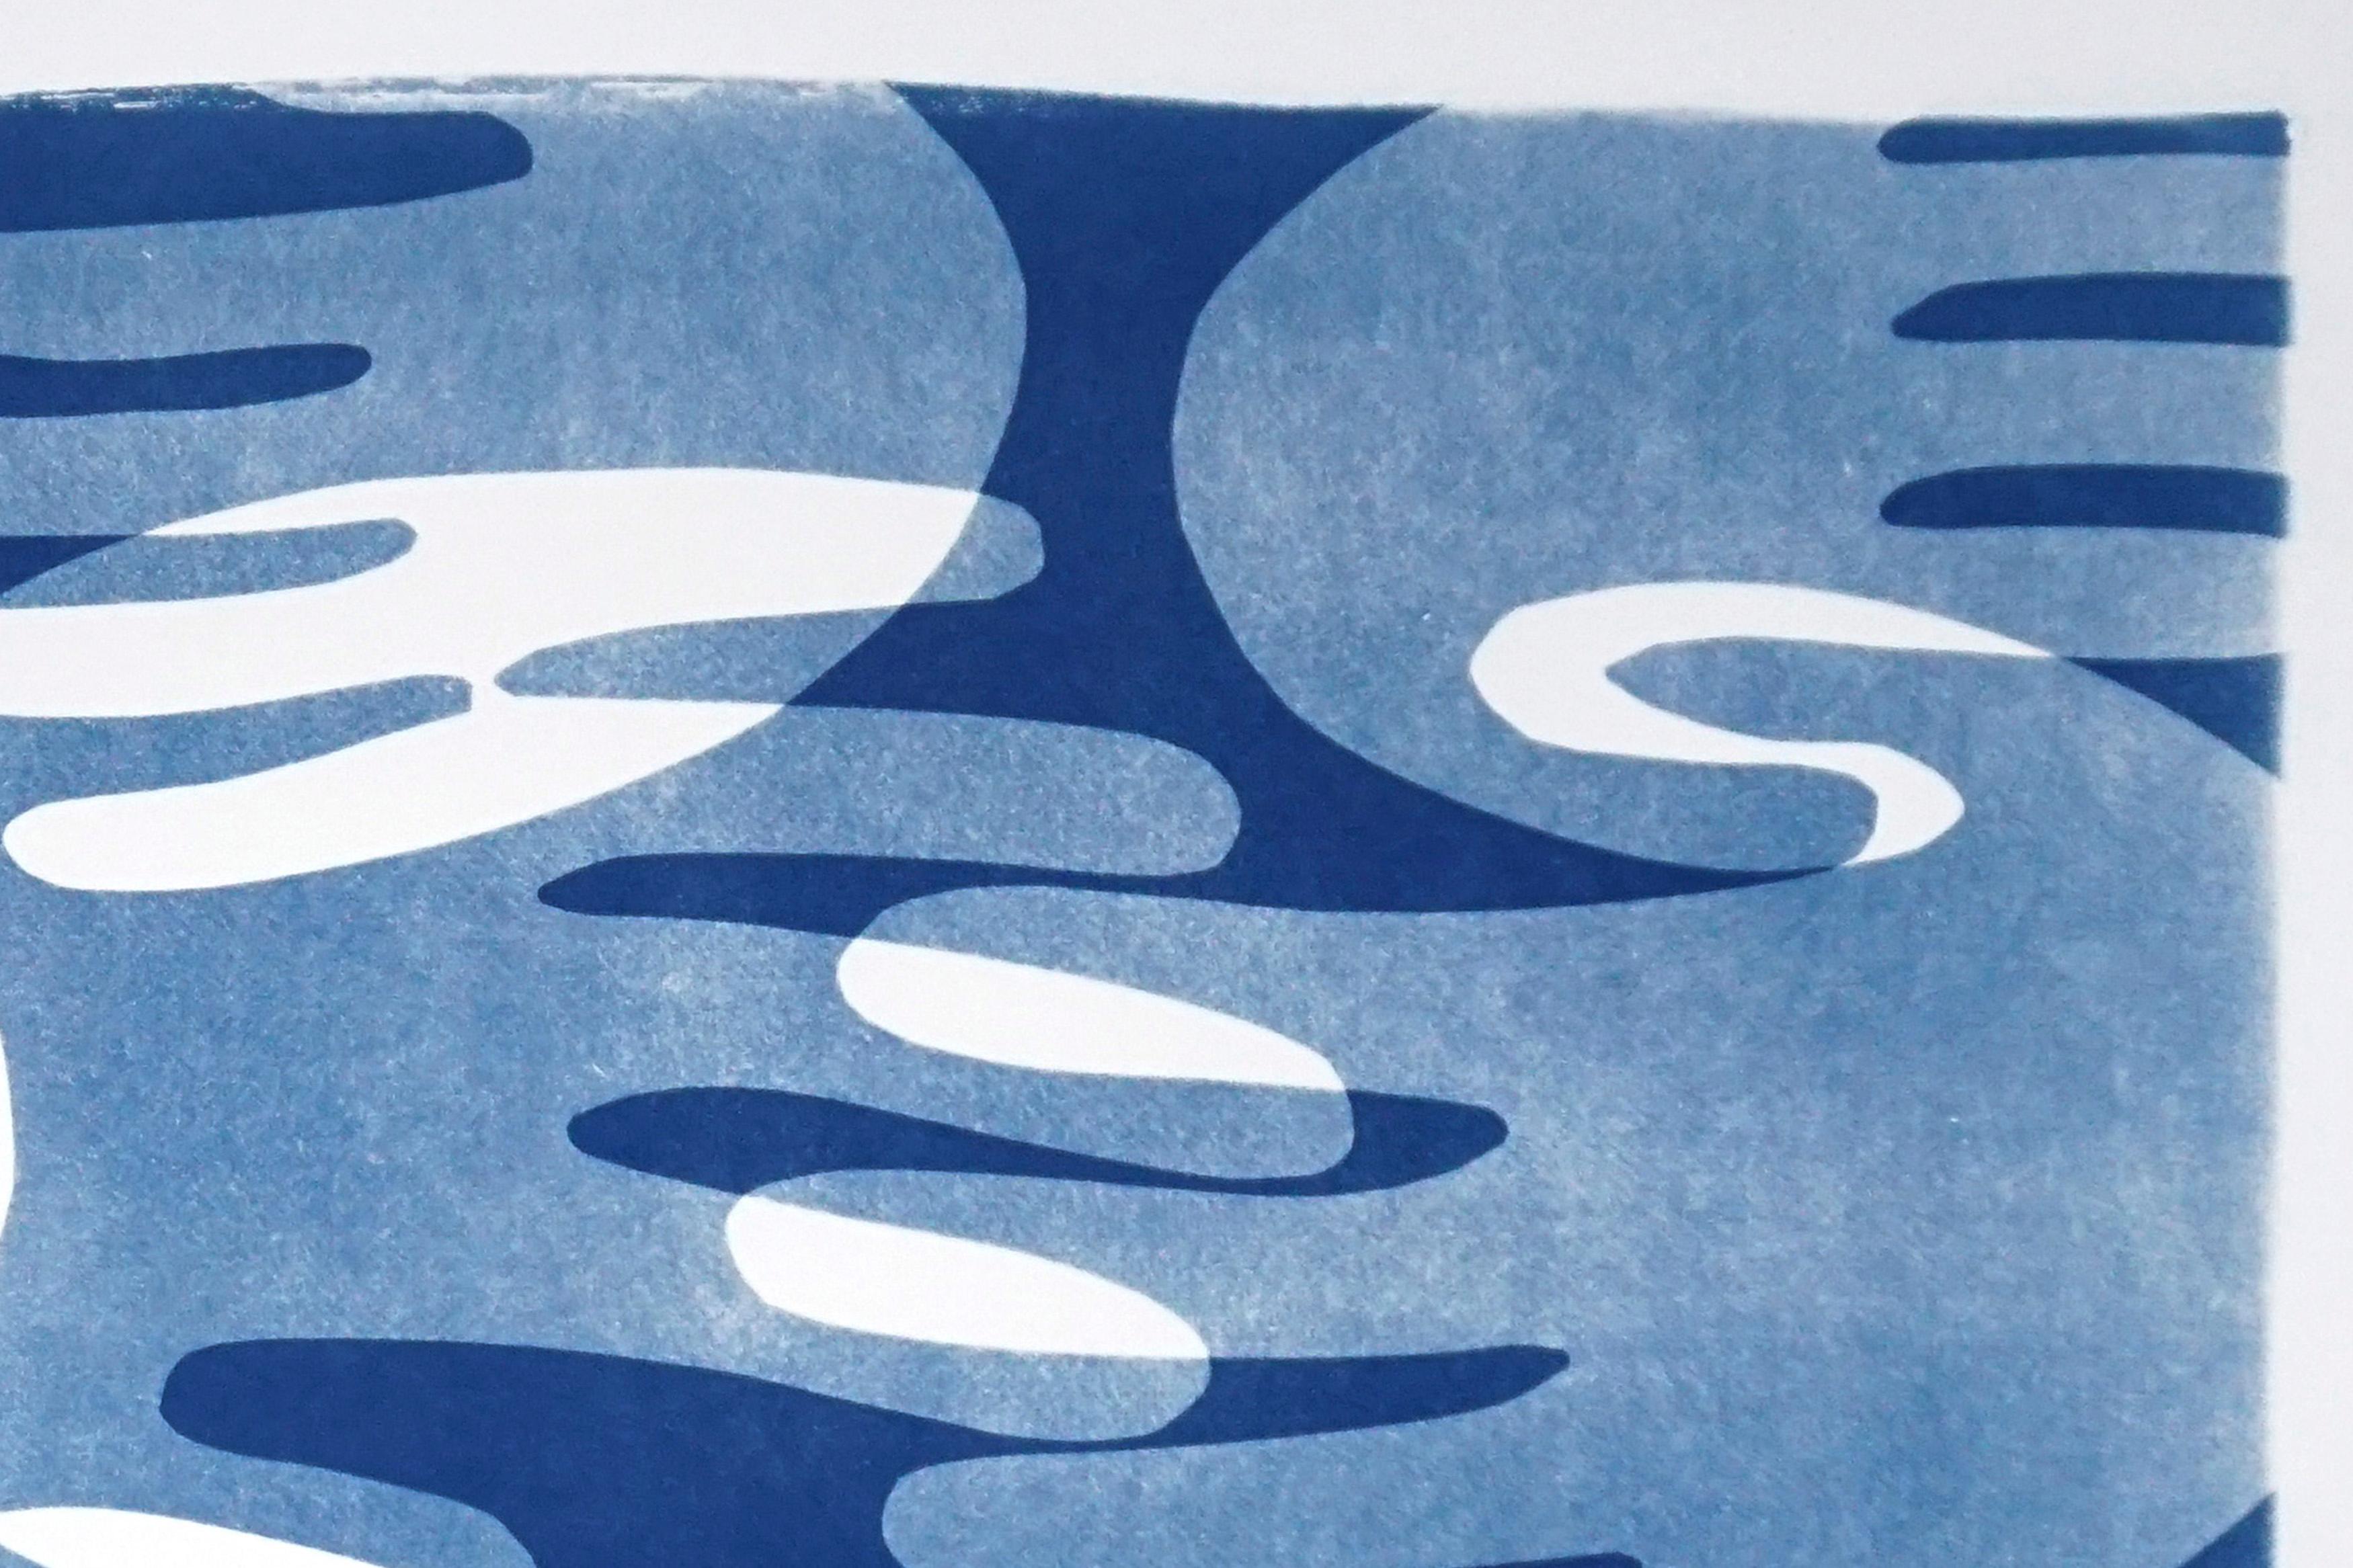 This is an exclusive handprinted unique cyanotype that takes its inspiration from the mid-century modern shapes. 
It's made by layering paper cutouts and different exposures using uv-light. 

Details:
+ Title: Reflections of Hands
+ Year: 2020
+